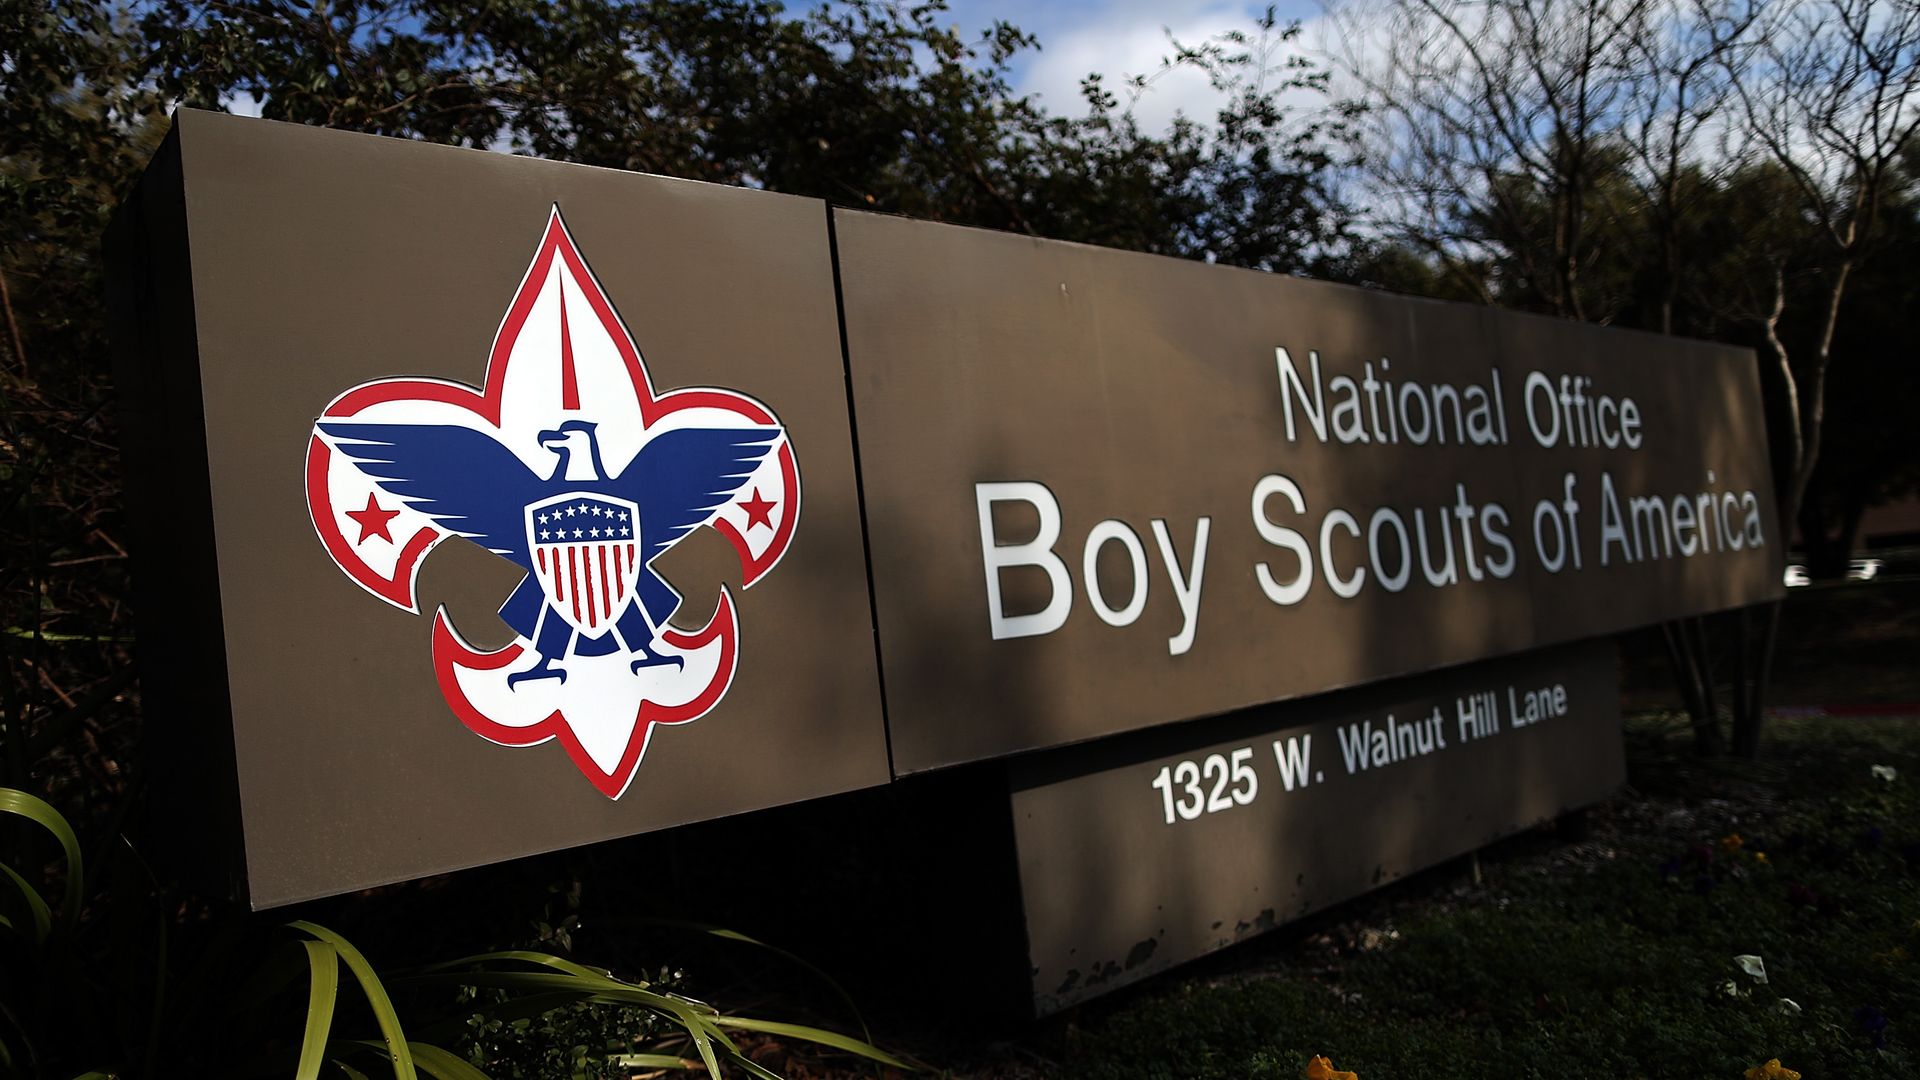 The sign in front of the BSA headquarters